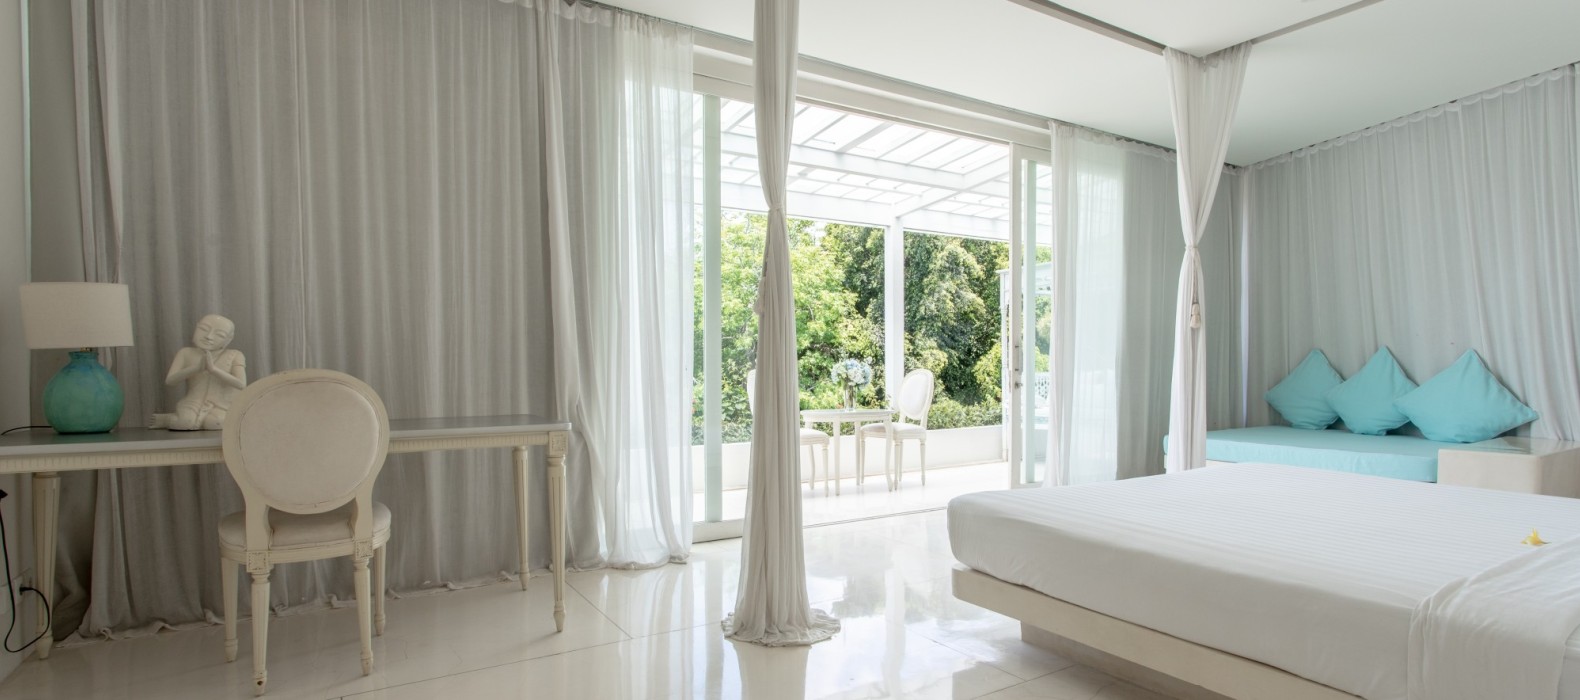 Bedroom of Villa Arise by the Sea in Bali